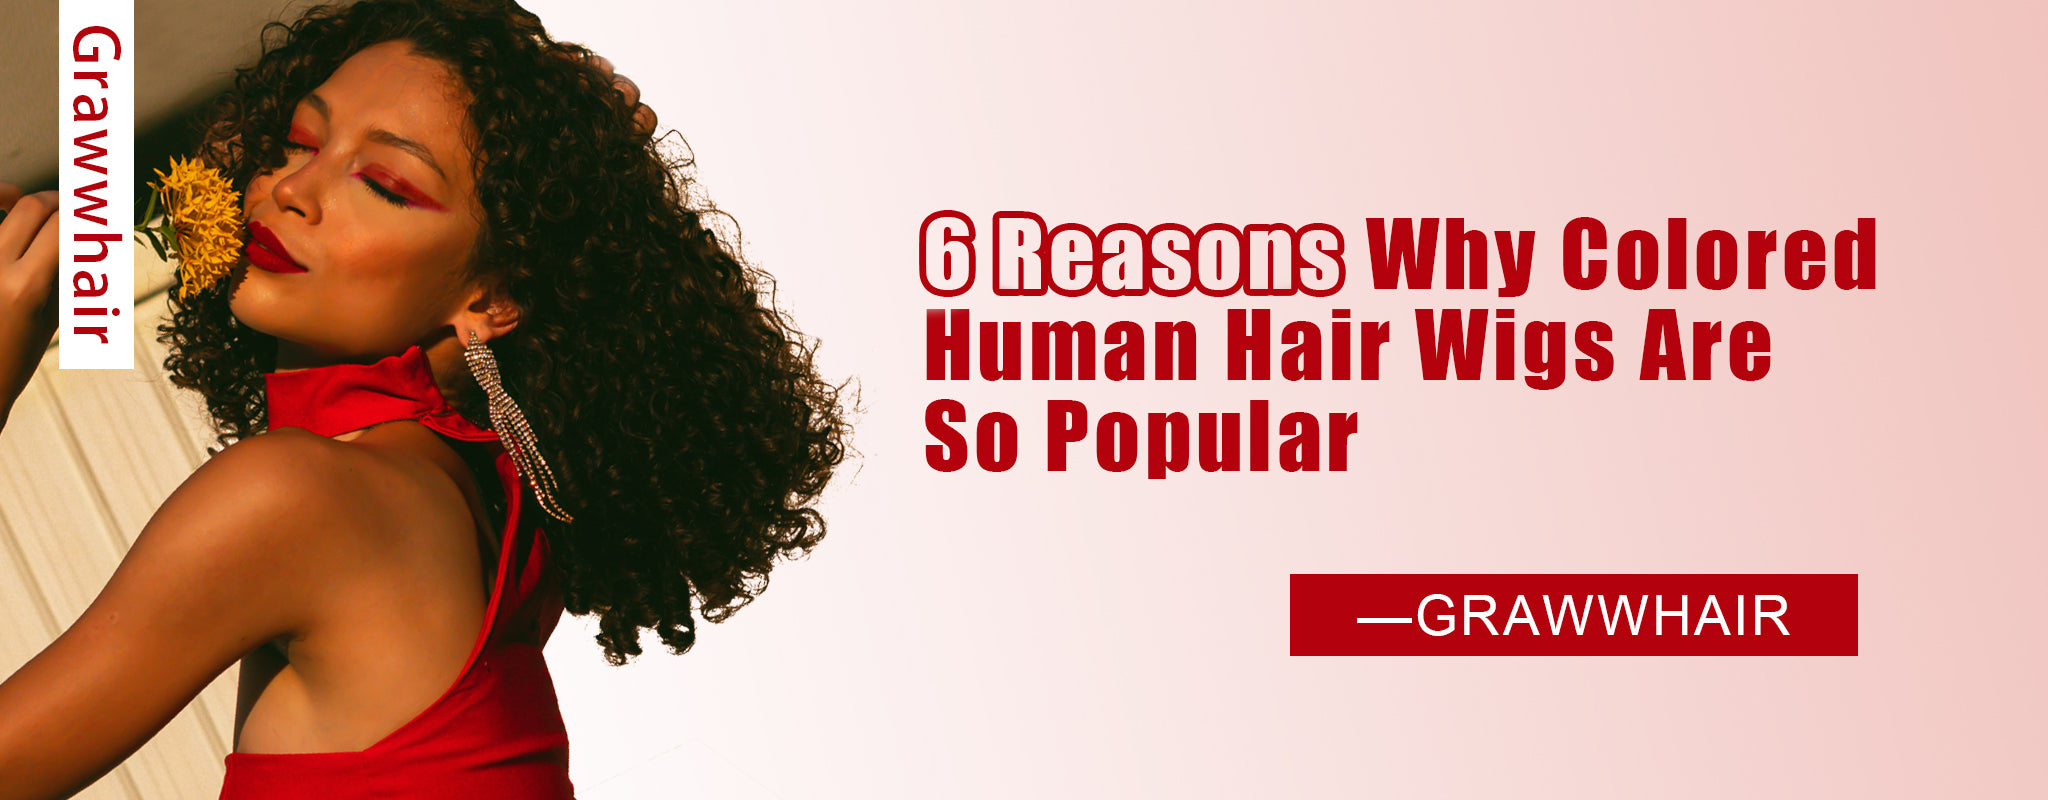 6 Reasons Why Colored Human Hair Wigs Are So Popular - Grawwhair